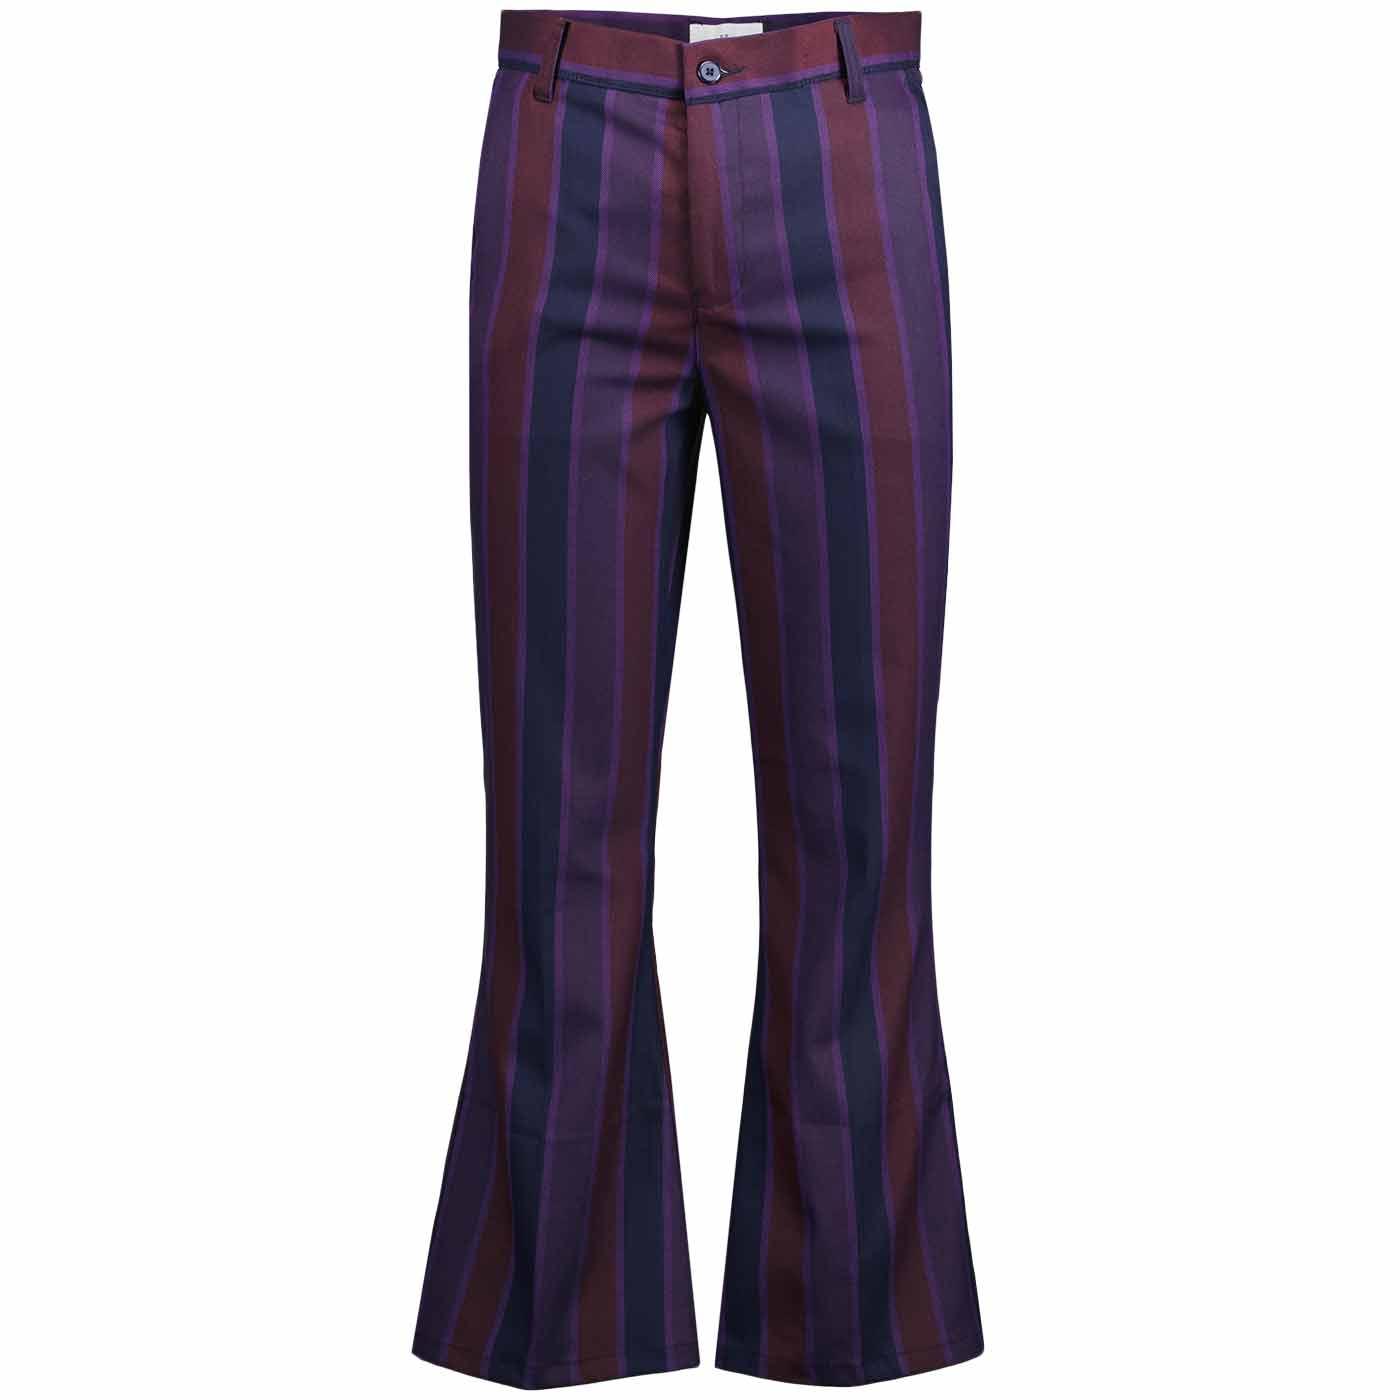 Offbeat MADCAP ENGLAND 60s Stripe Flared Trousers